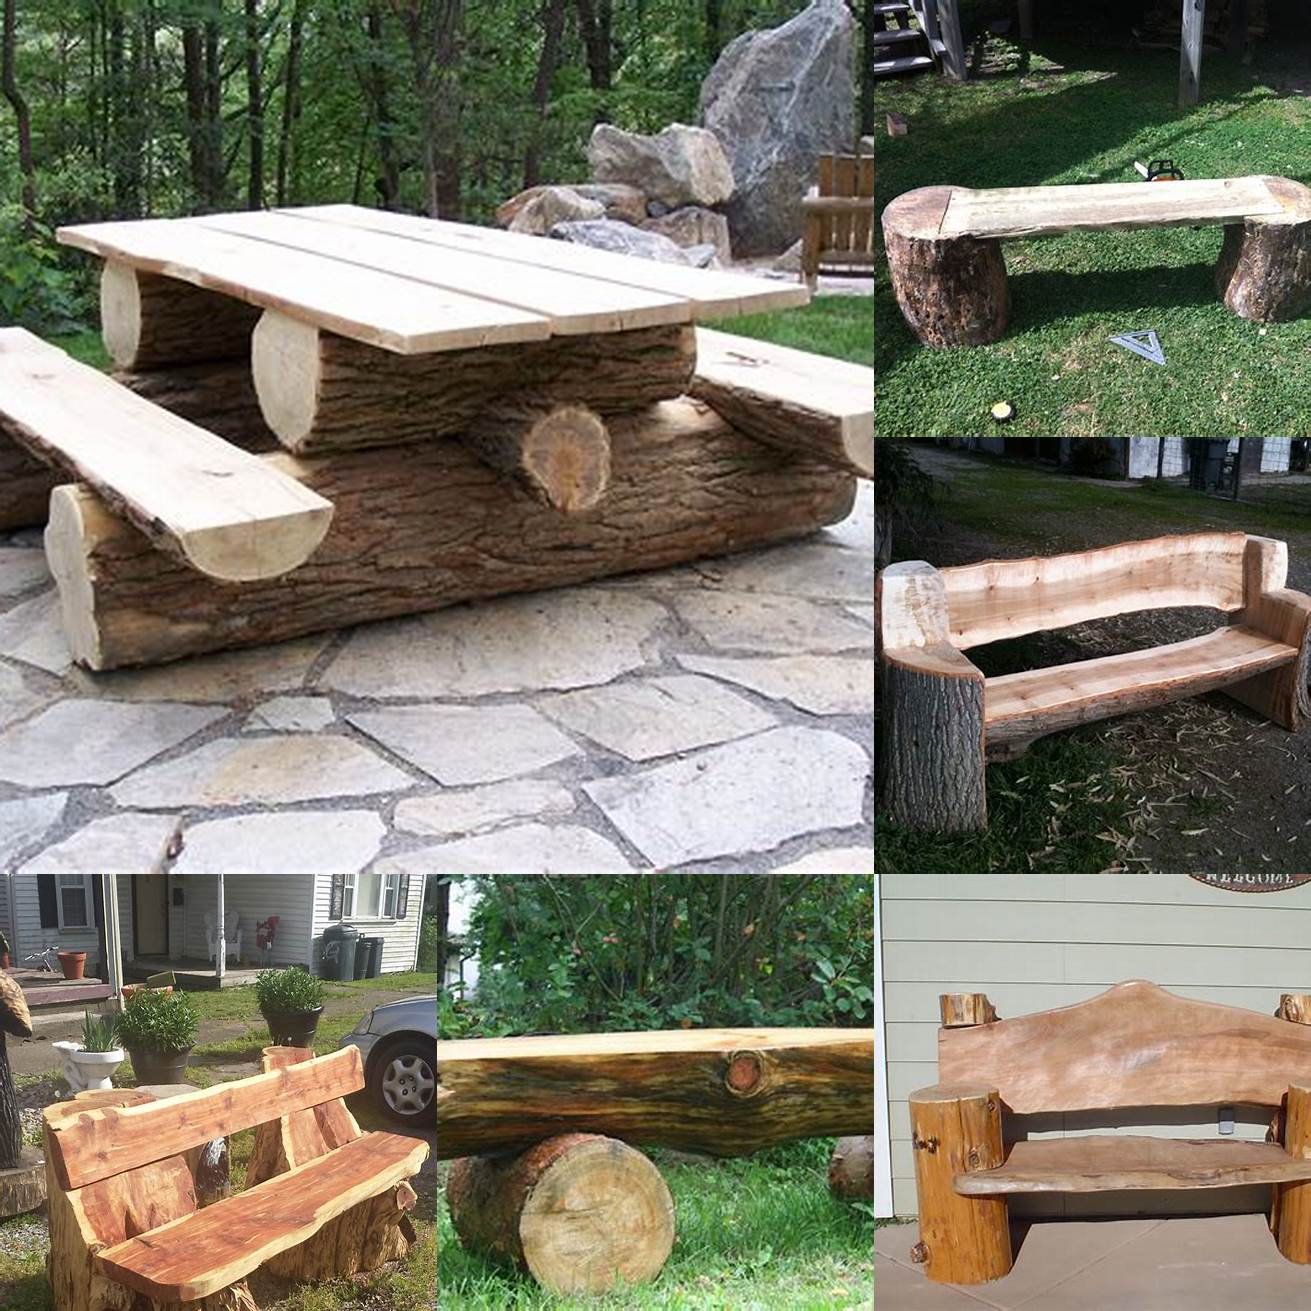 Build a log bench Use logs or stump sections to create a charming and rustic outdoor bench